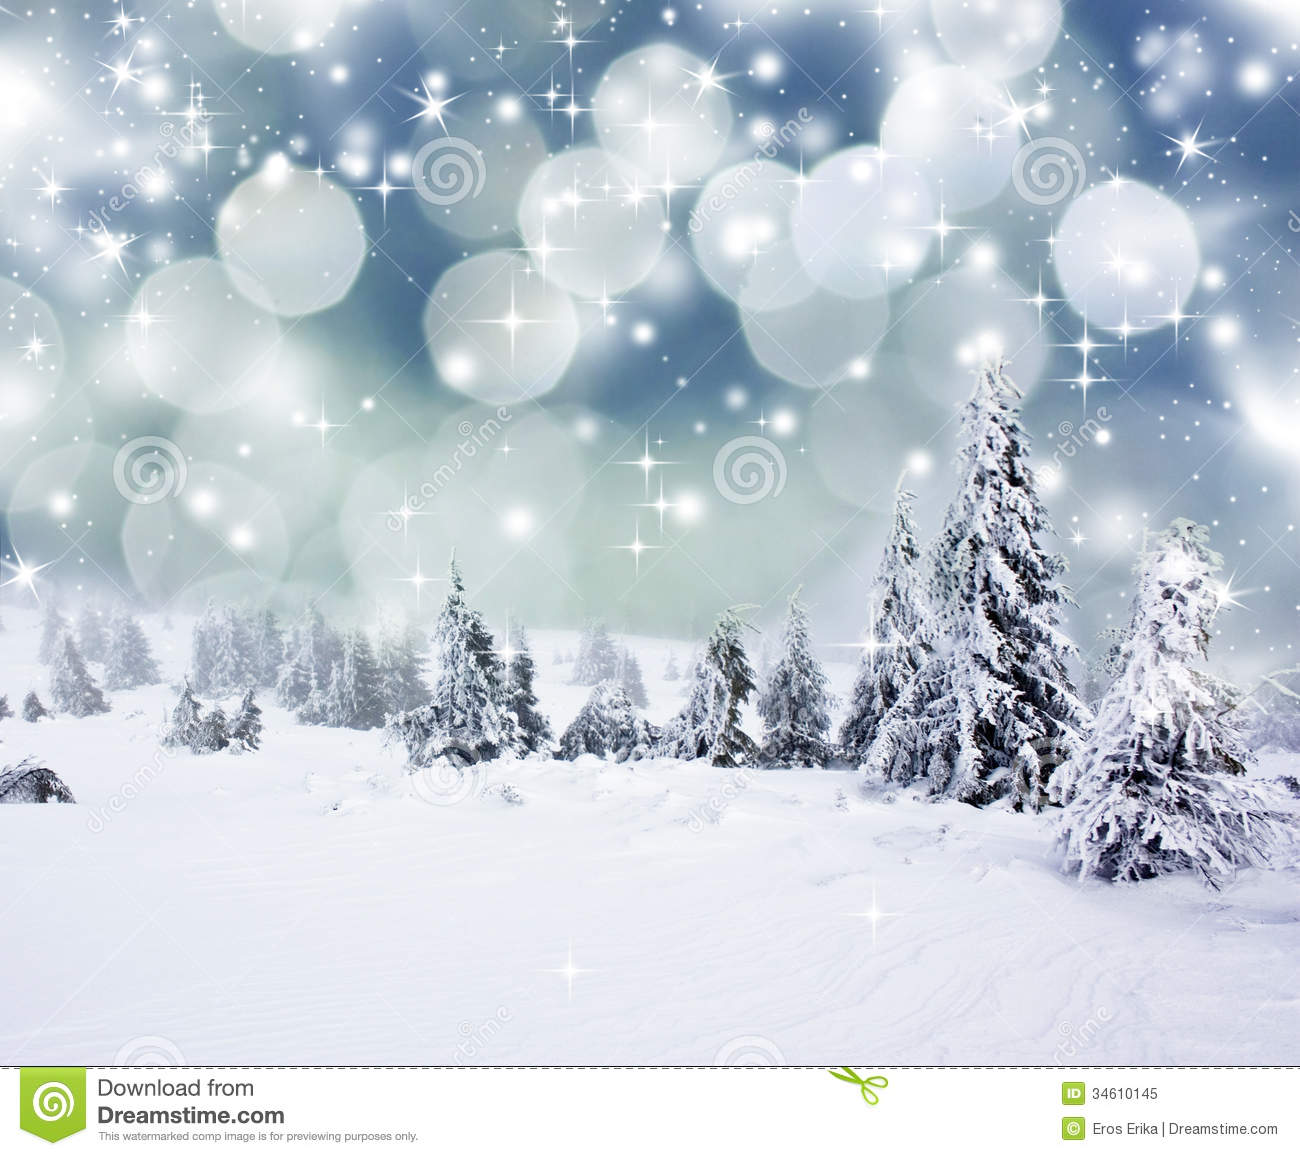 Christmas Background With Snowy Fir Trees Royalty Free Stock Photo    